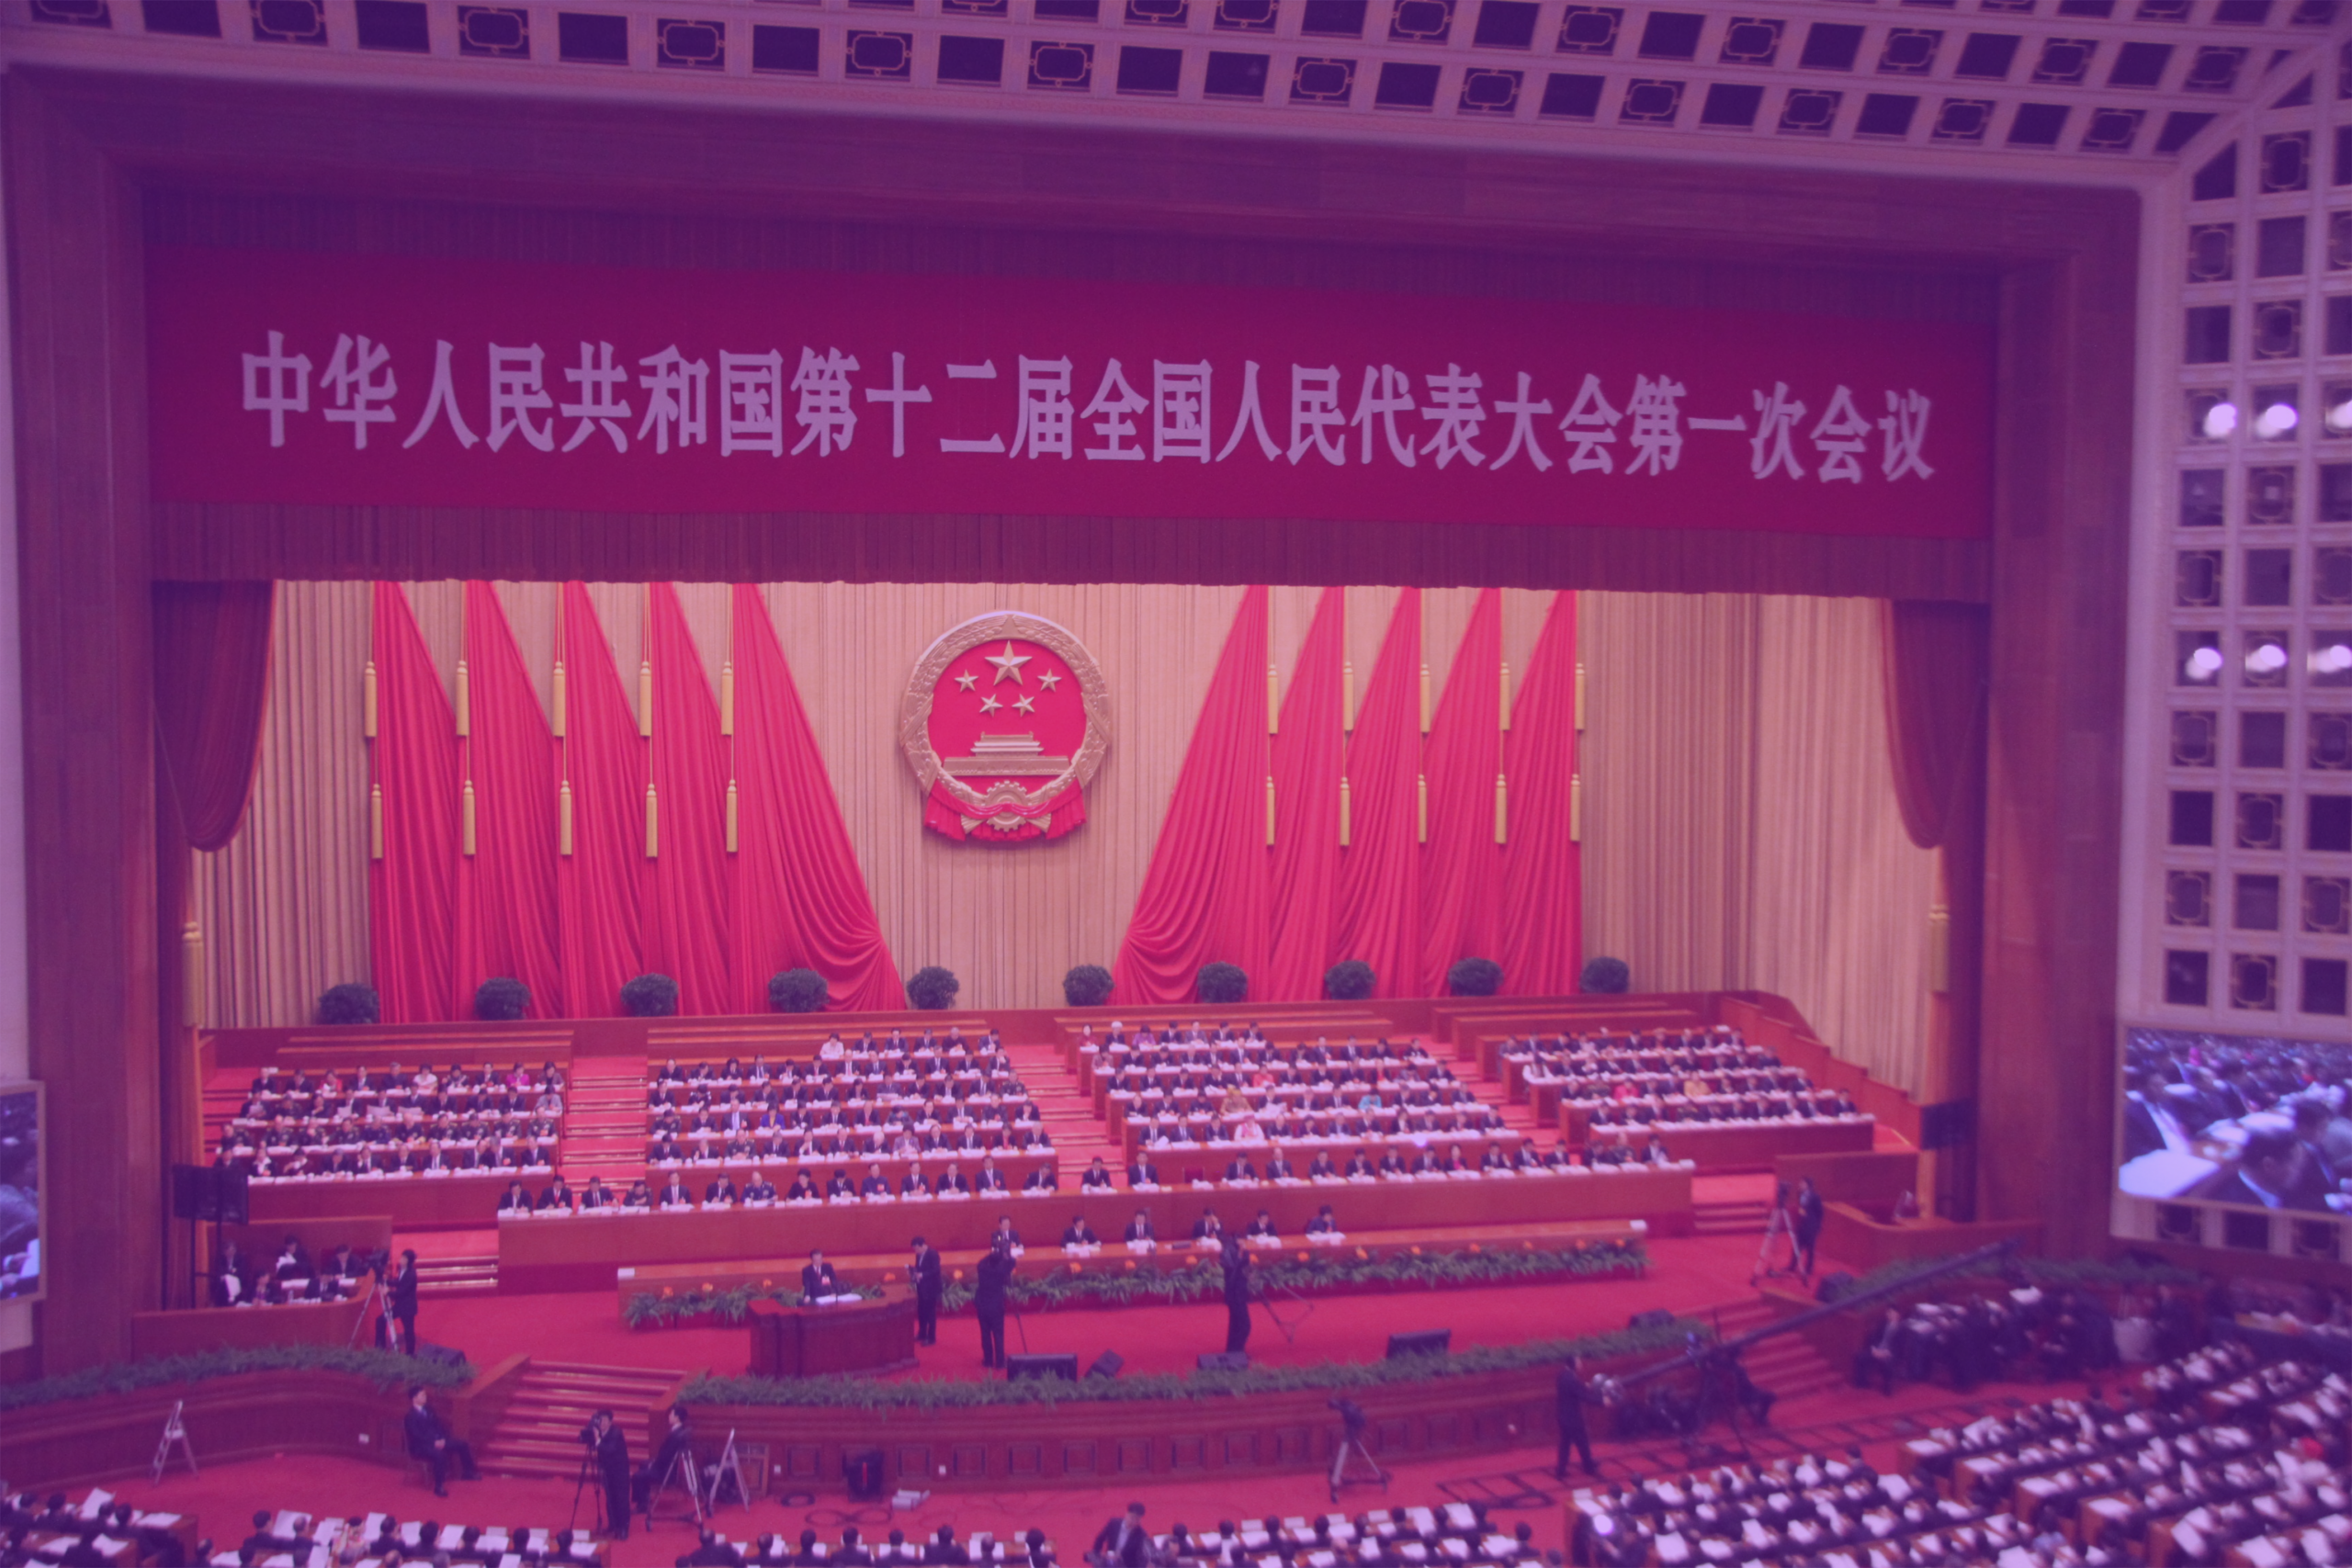 Christine Hackenesch and Julia Bader – The Struggle for Minds and Influence: The Chinese Communist Party’s Global Outreach